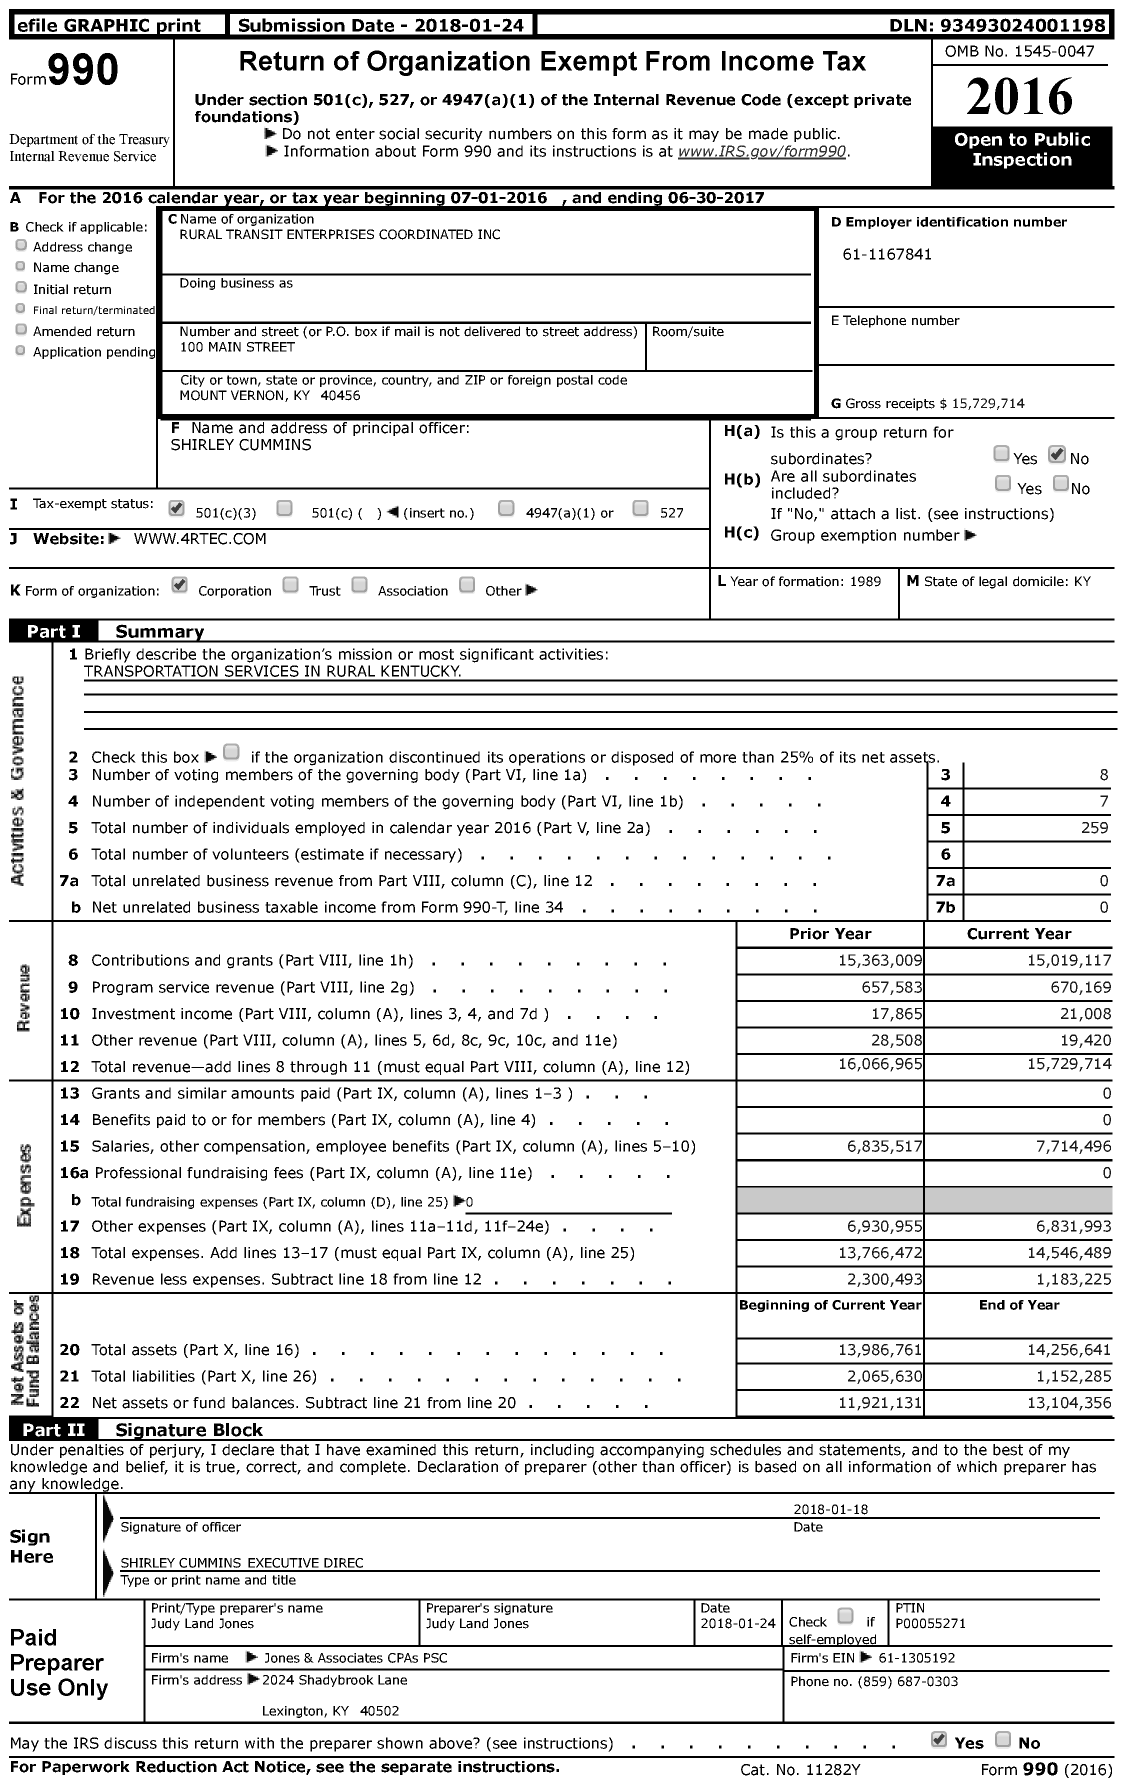 Image of first page of 2016 Form 990 for Rural Transit Enterprises Coordinated